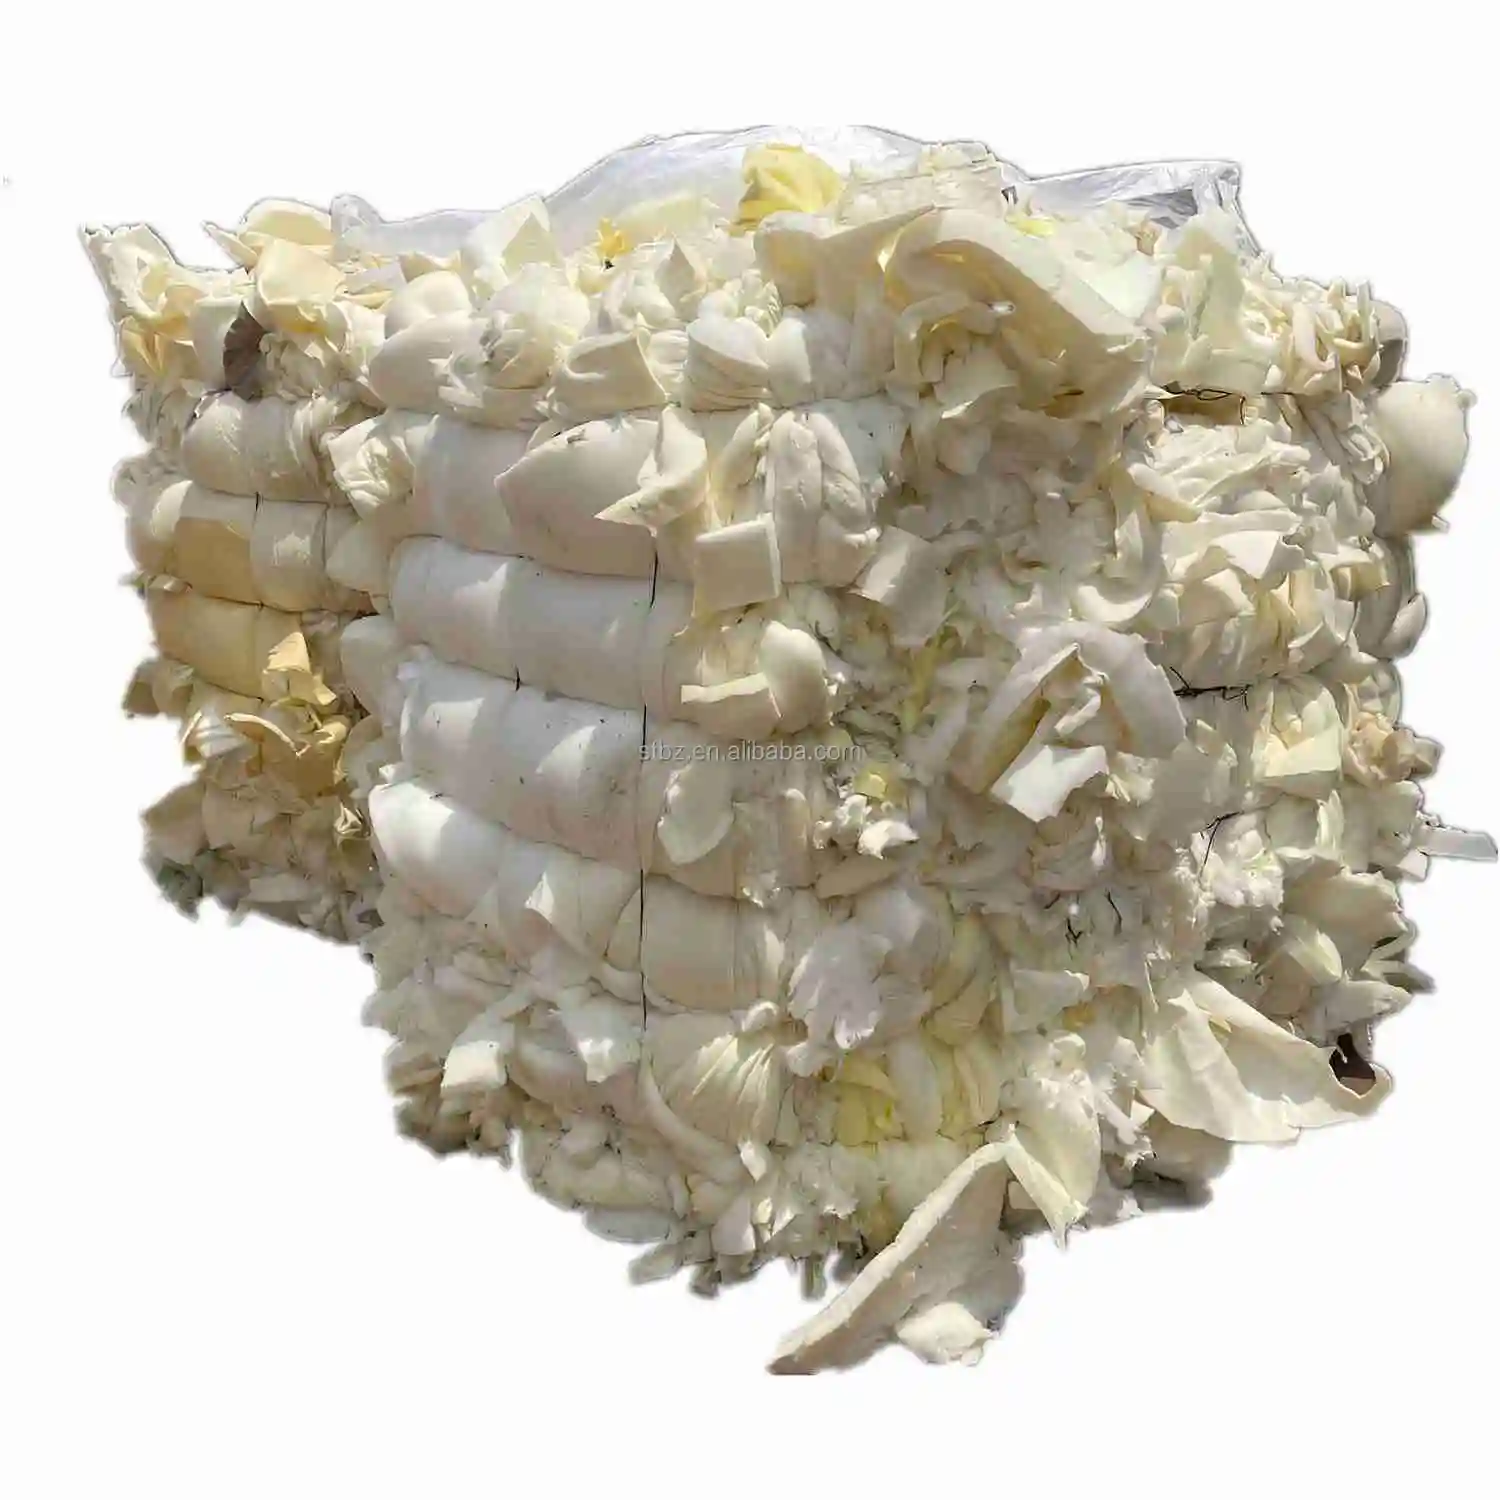 Dry and clean white and yellow foam scrap with 10% skin without water (1600322588105)